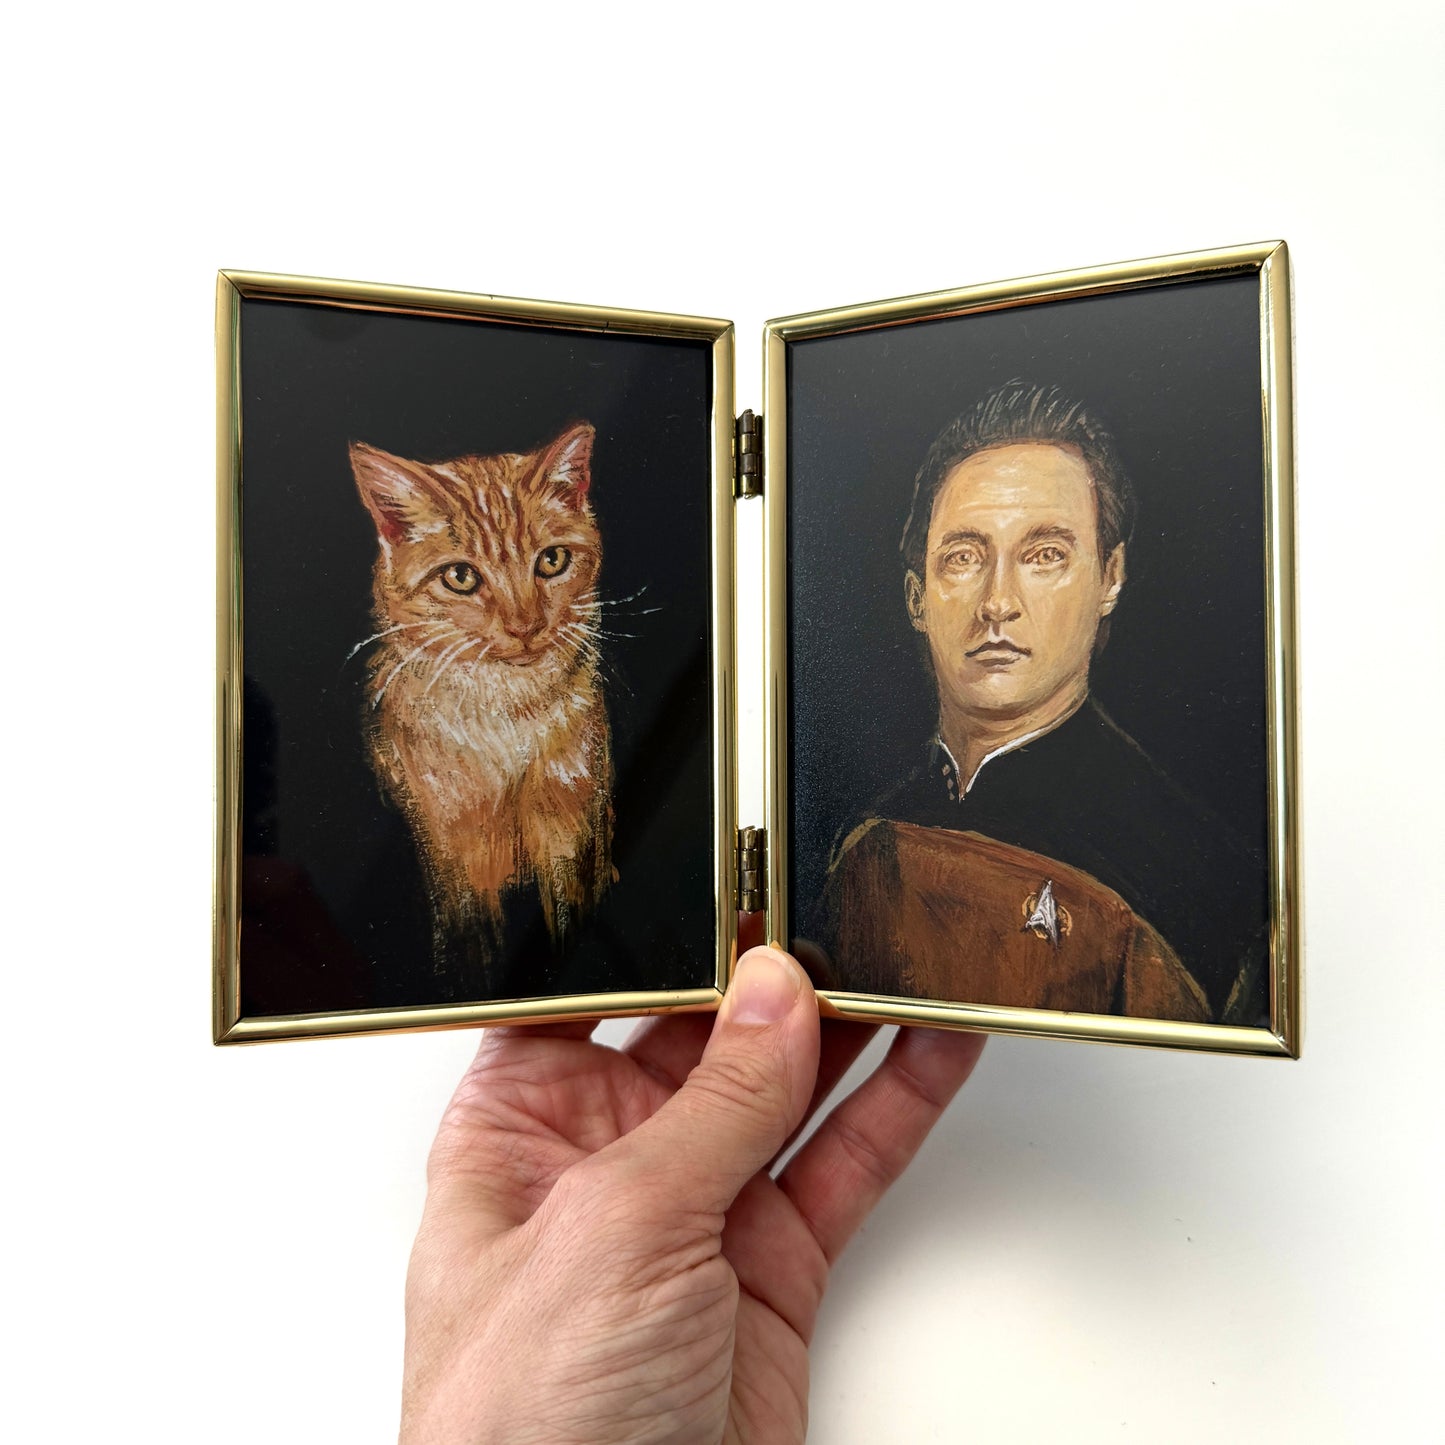 My Cat and I - PRINT in Vintage Brass Folding Frame